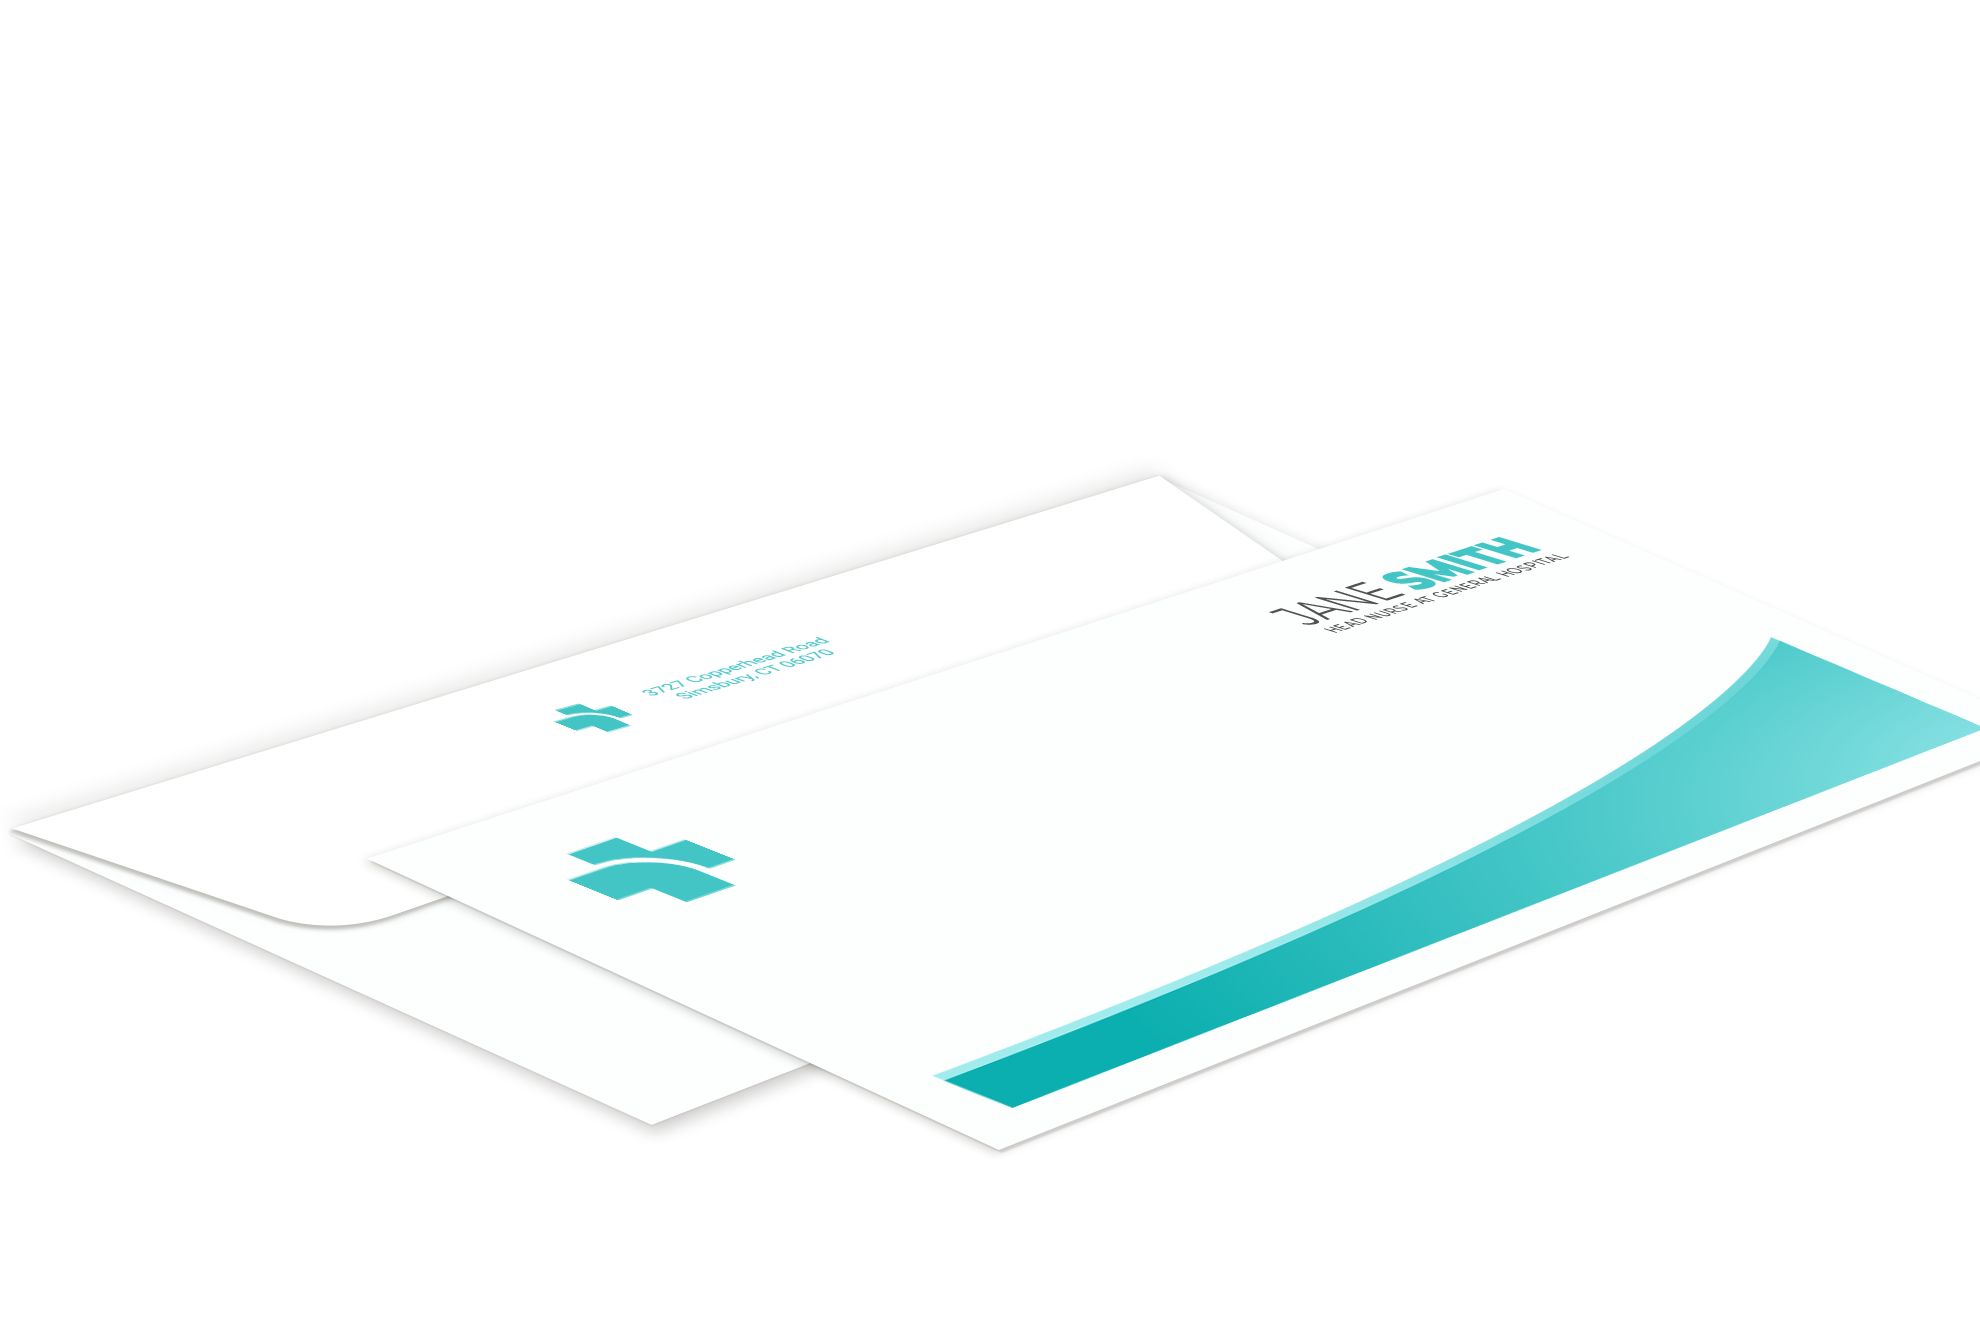 Envelopes for medical records: * For important communications
* With or without window
* Templates ready